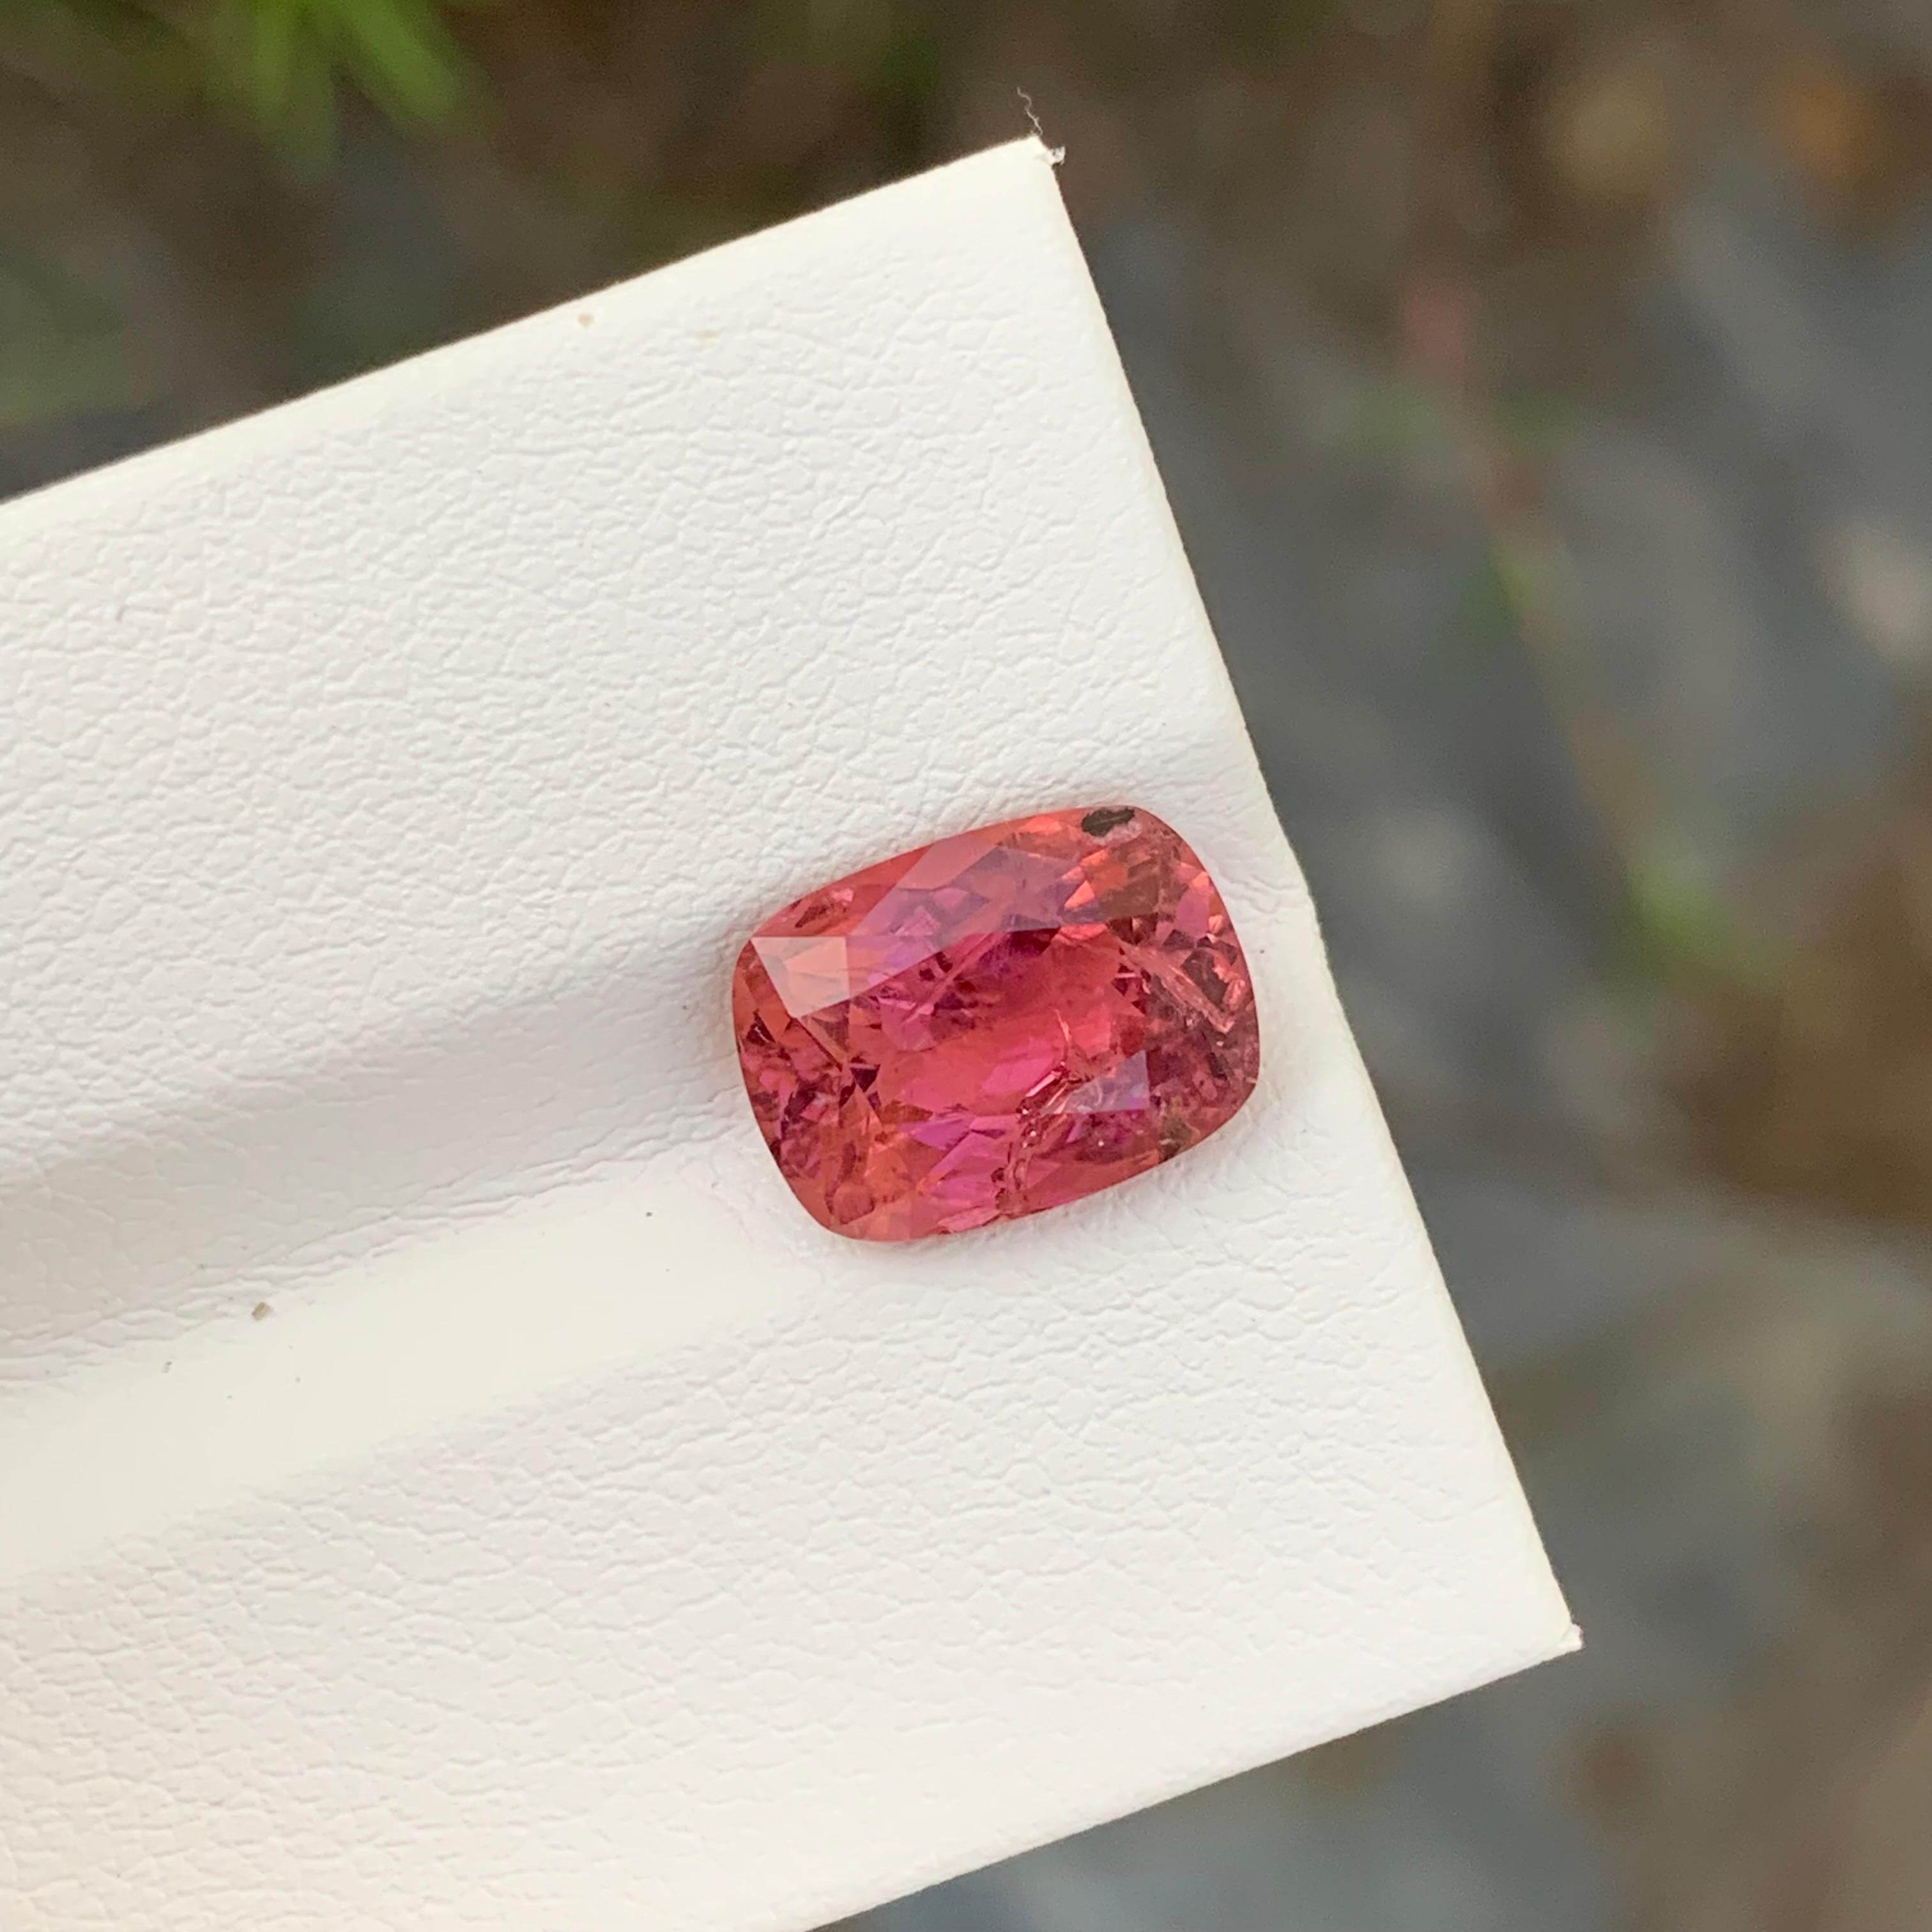 3.20 Carat Faceted Rubellite Tourmaline Cushion Shape Gem From Africa  For Sale 4